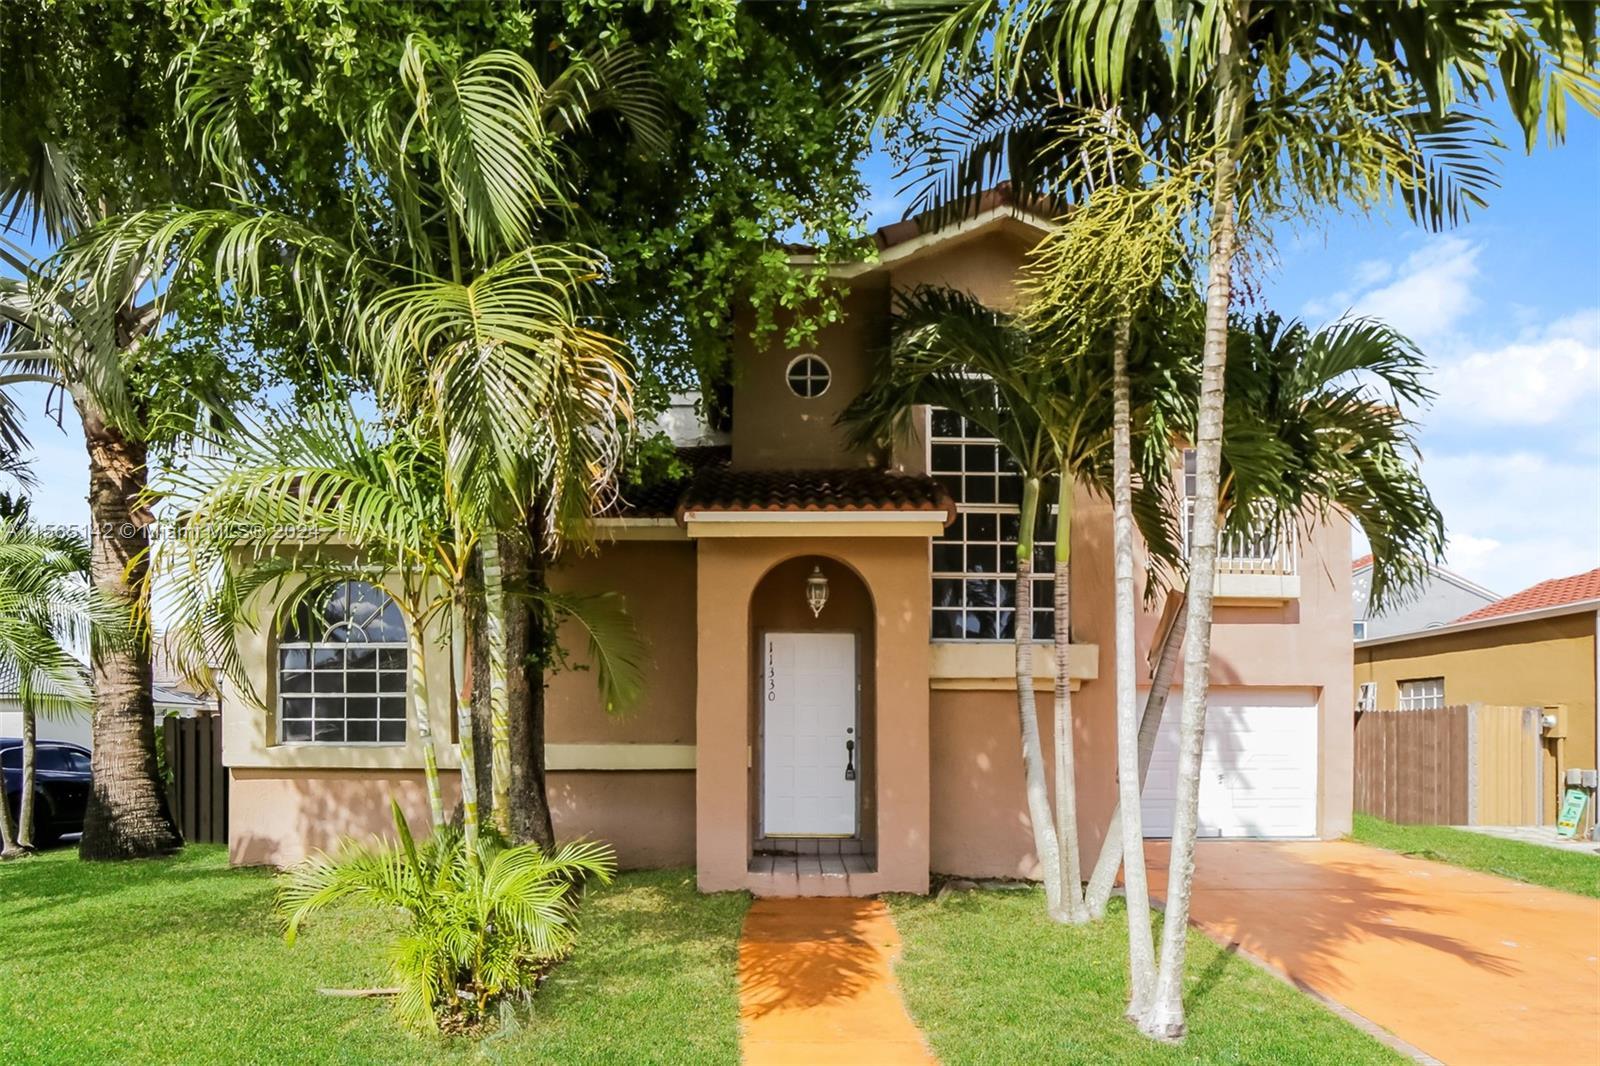 This charming 3-bedroom, 2.5-bath sanctuary with a refreshing pool, a new roof, and your personal to